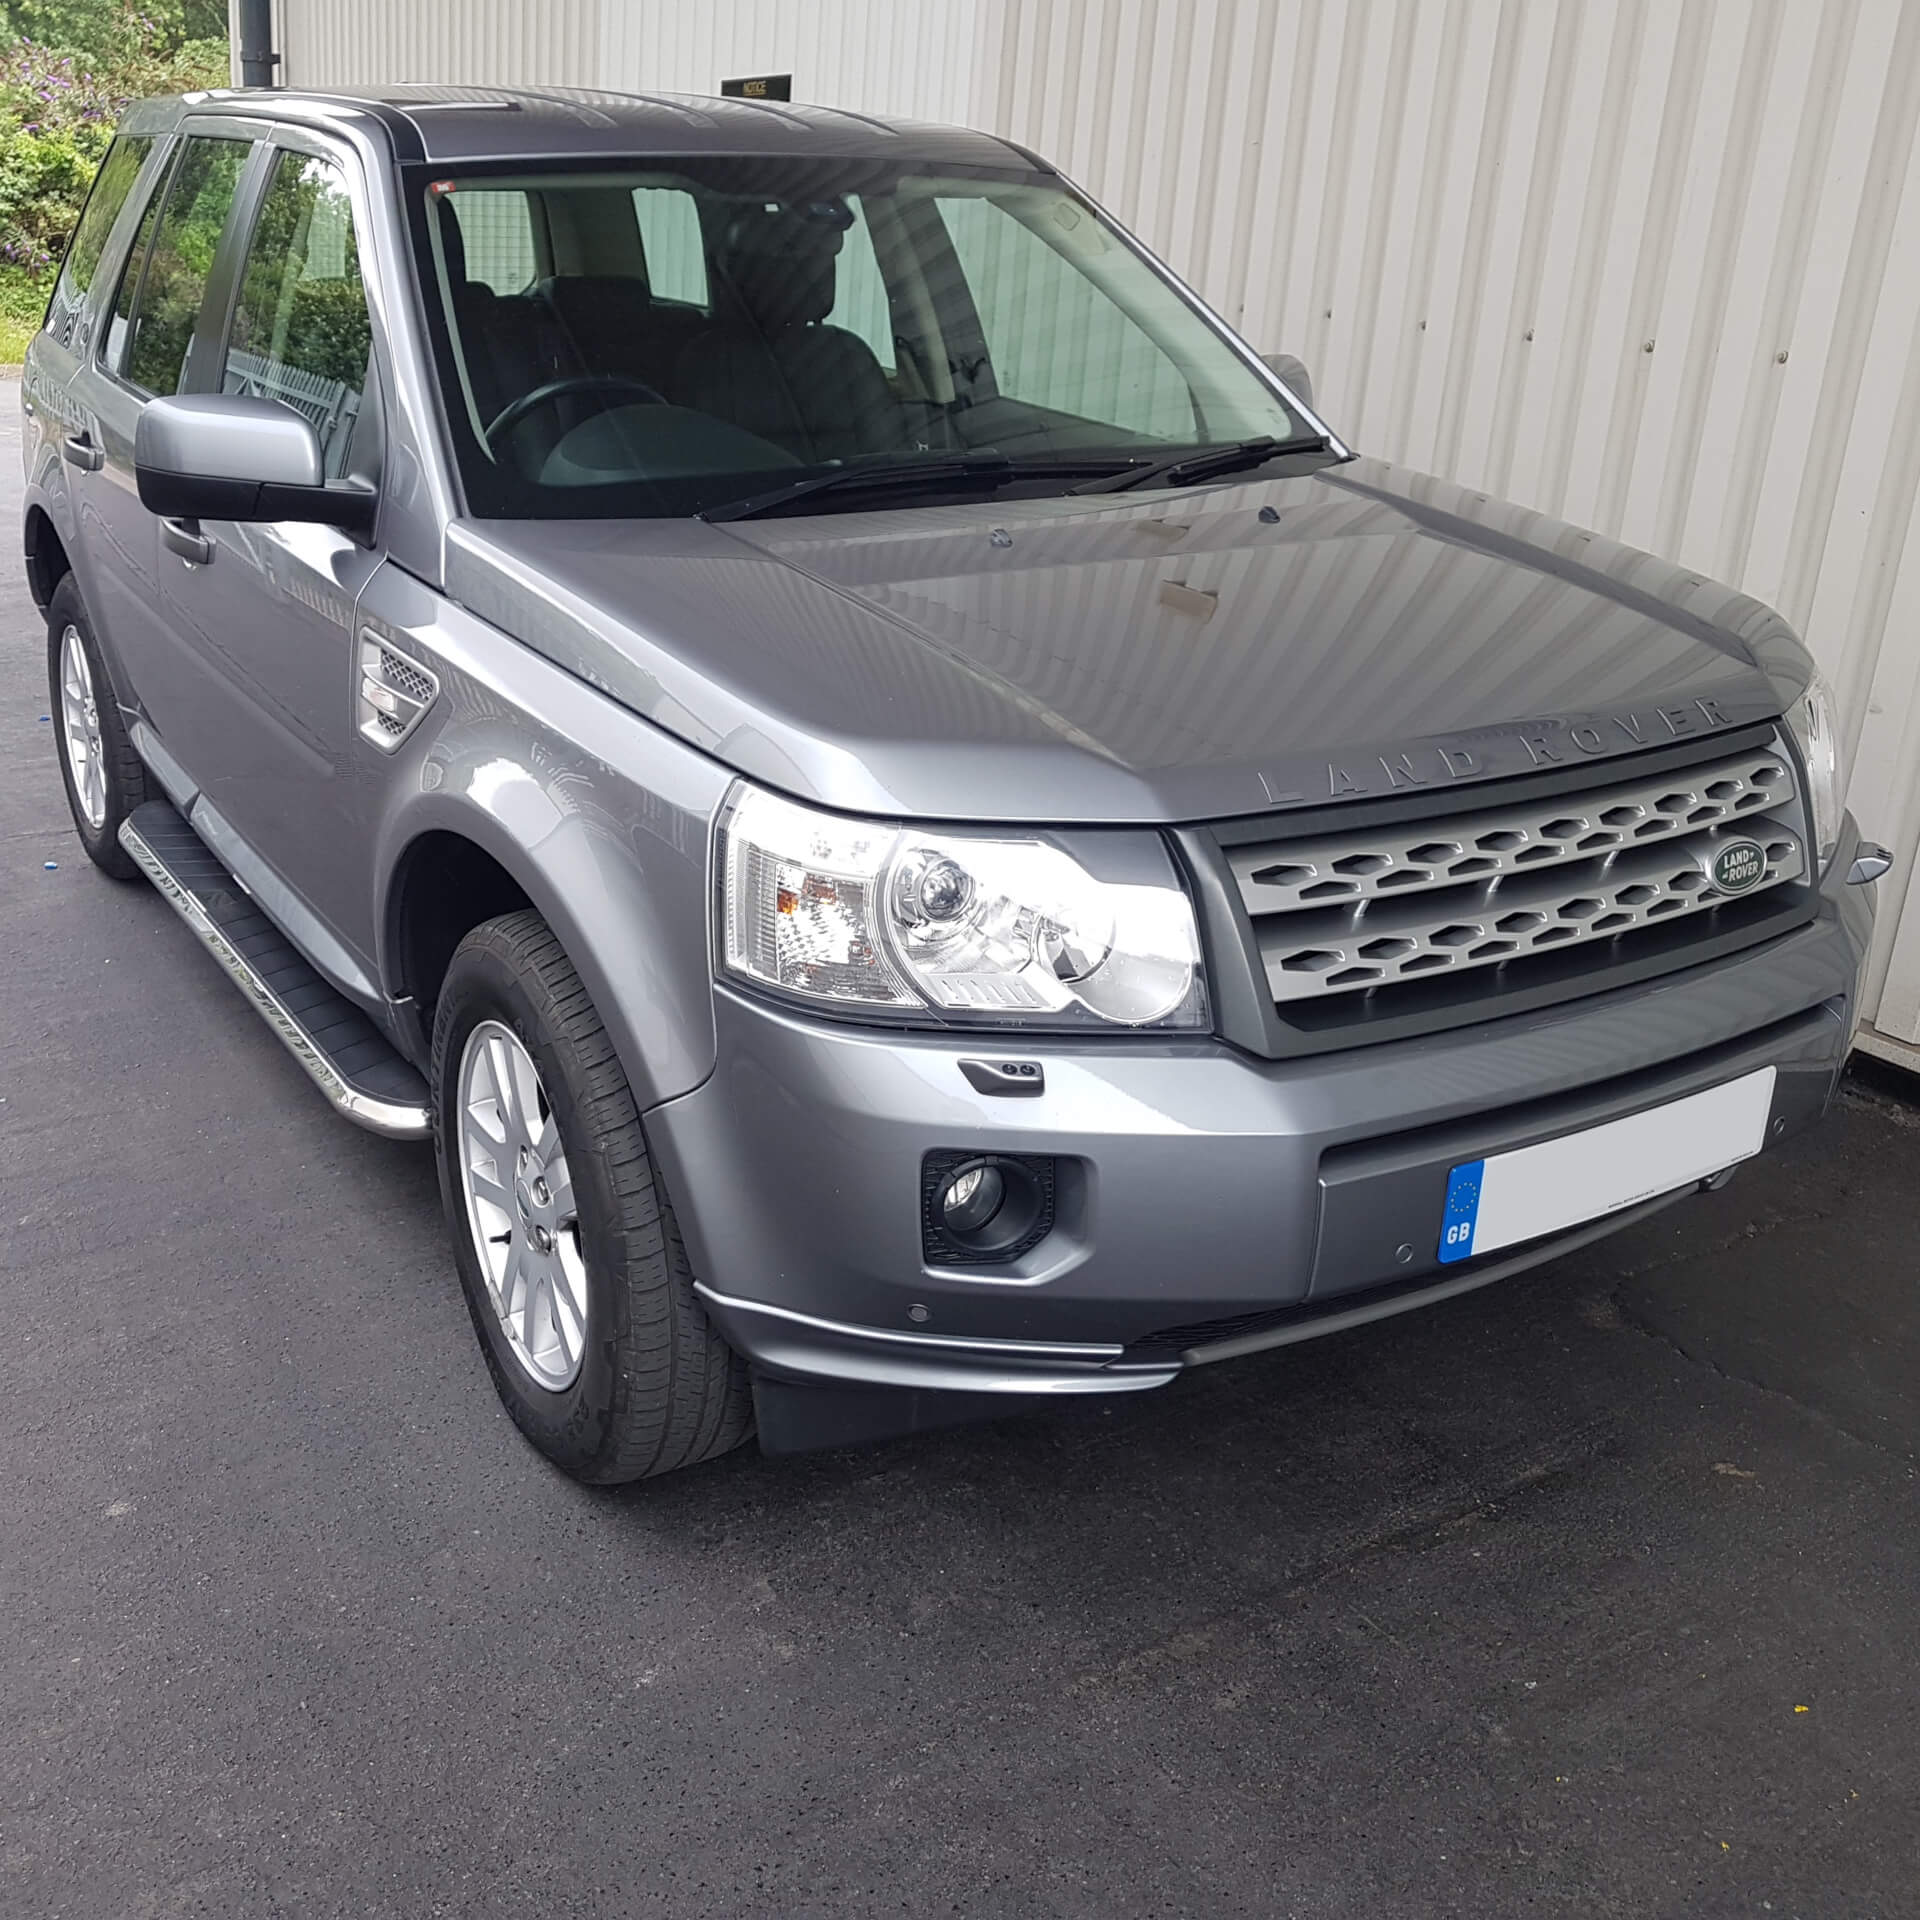 Direct4x4 accessories for Land Rover Freelander vehicles with a photo of a silver Land Rover Freelander fitted with our high flyer side steps